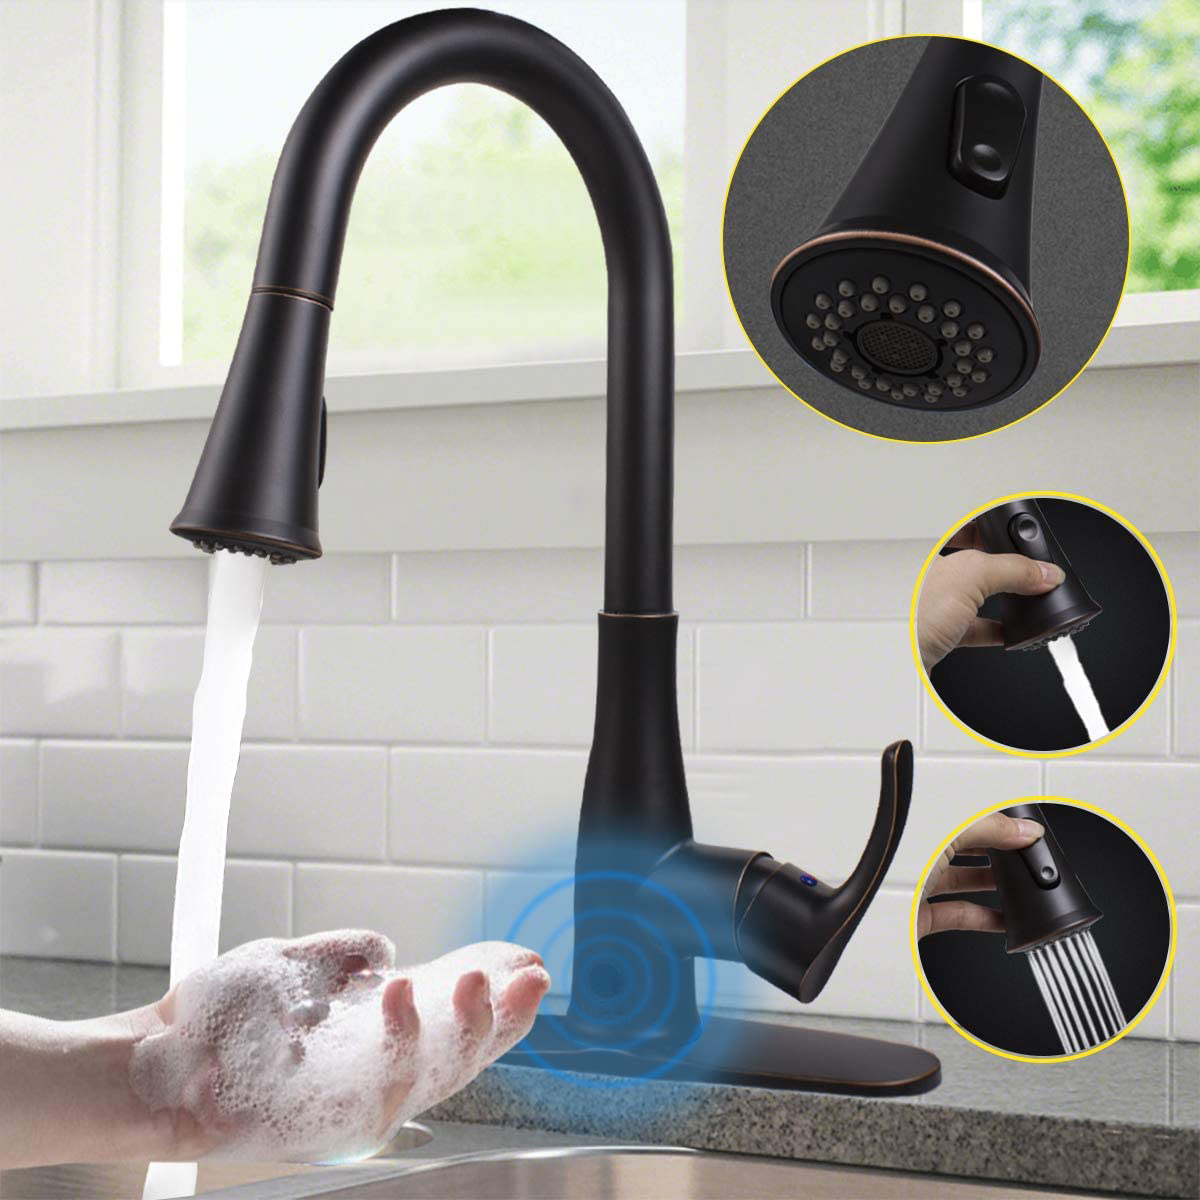 Aquacubic cUPC Touchless Kitchen Faucets Motion Sensor Automatic Kitchen Sink Faucet with 2 Function Pull Down Sprayer